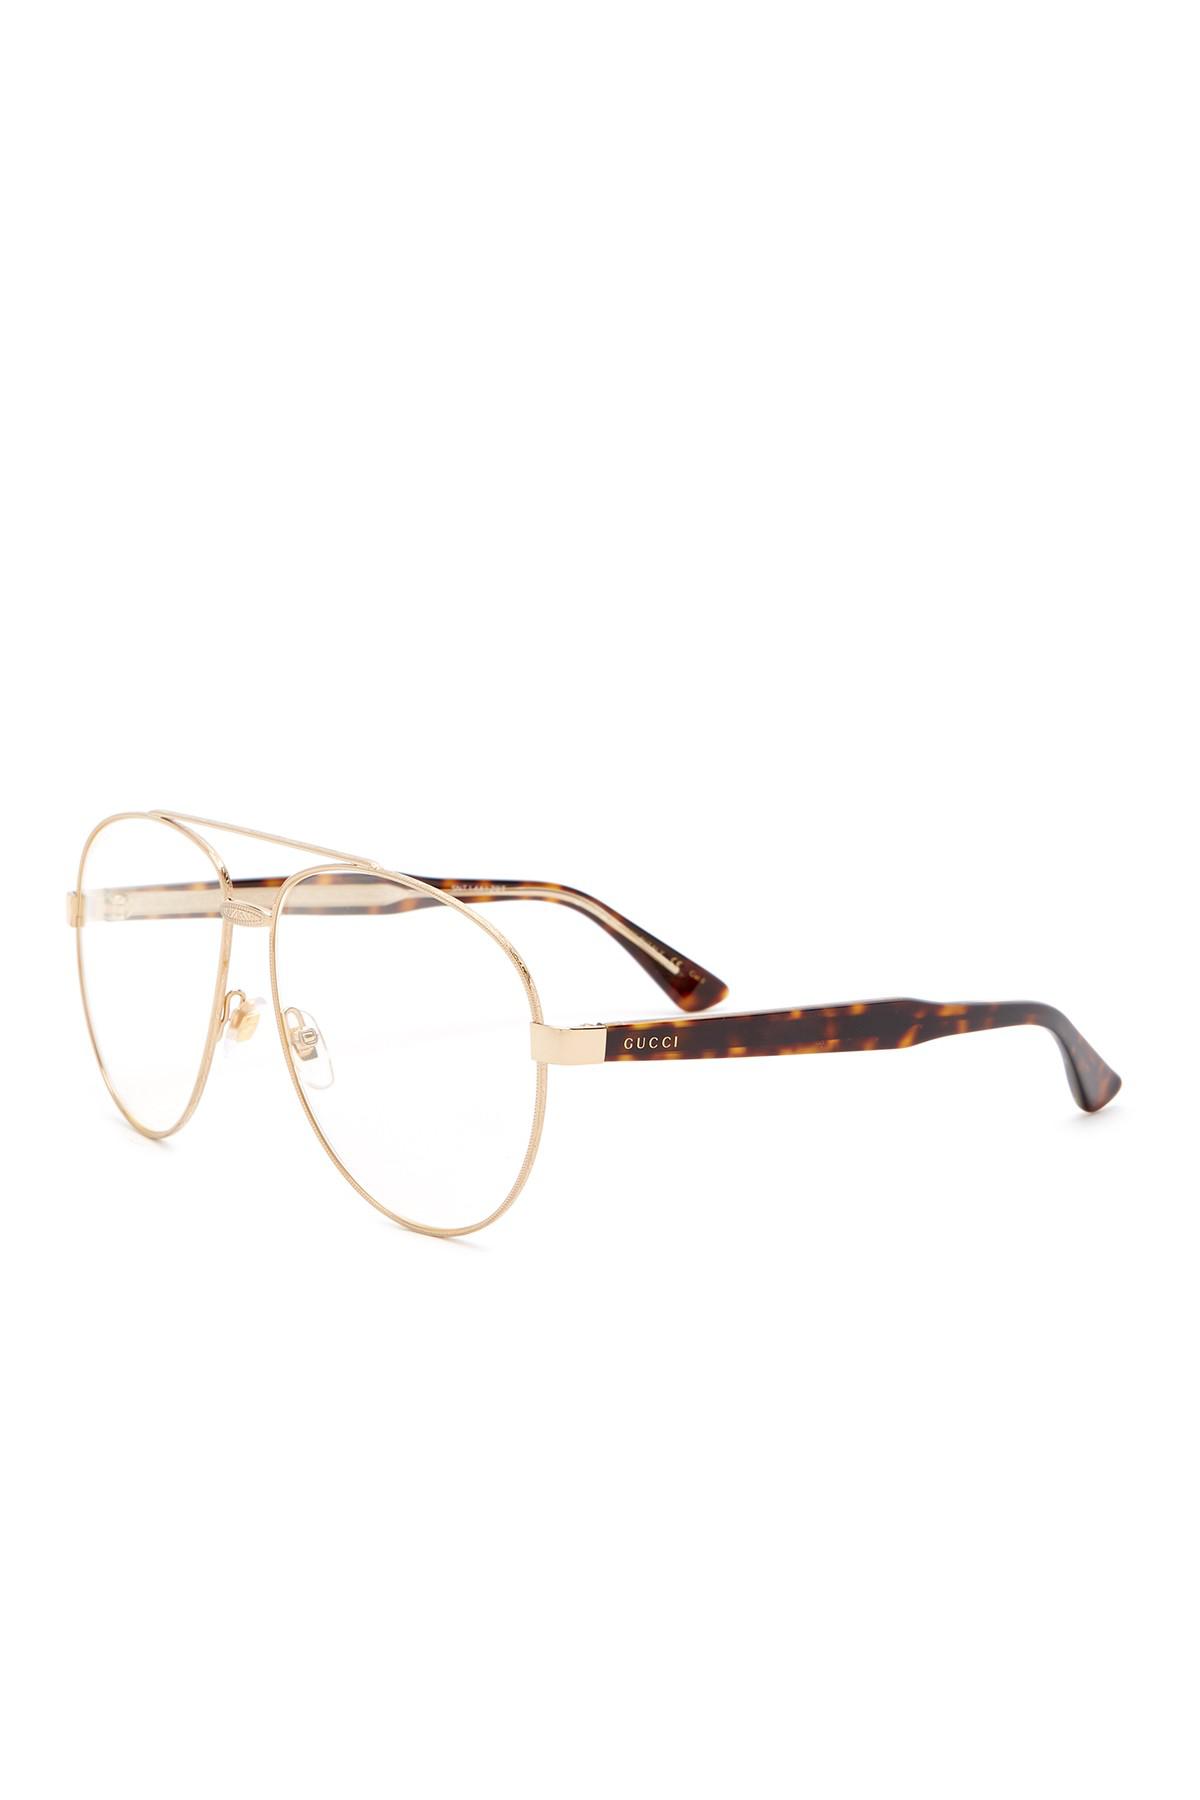 Gucci 61mm Aviator Optical Frames for 